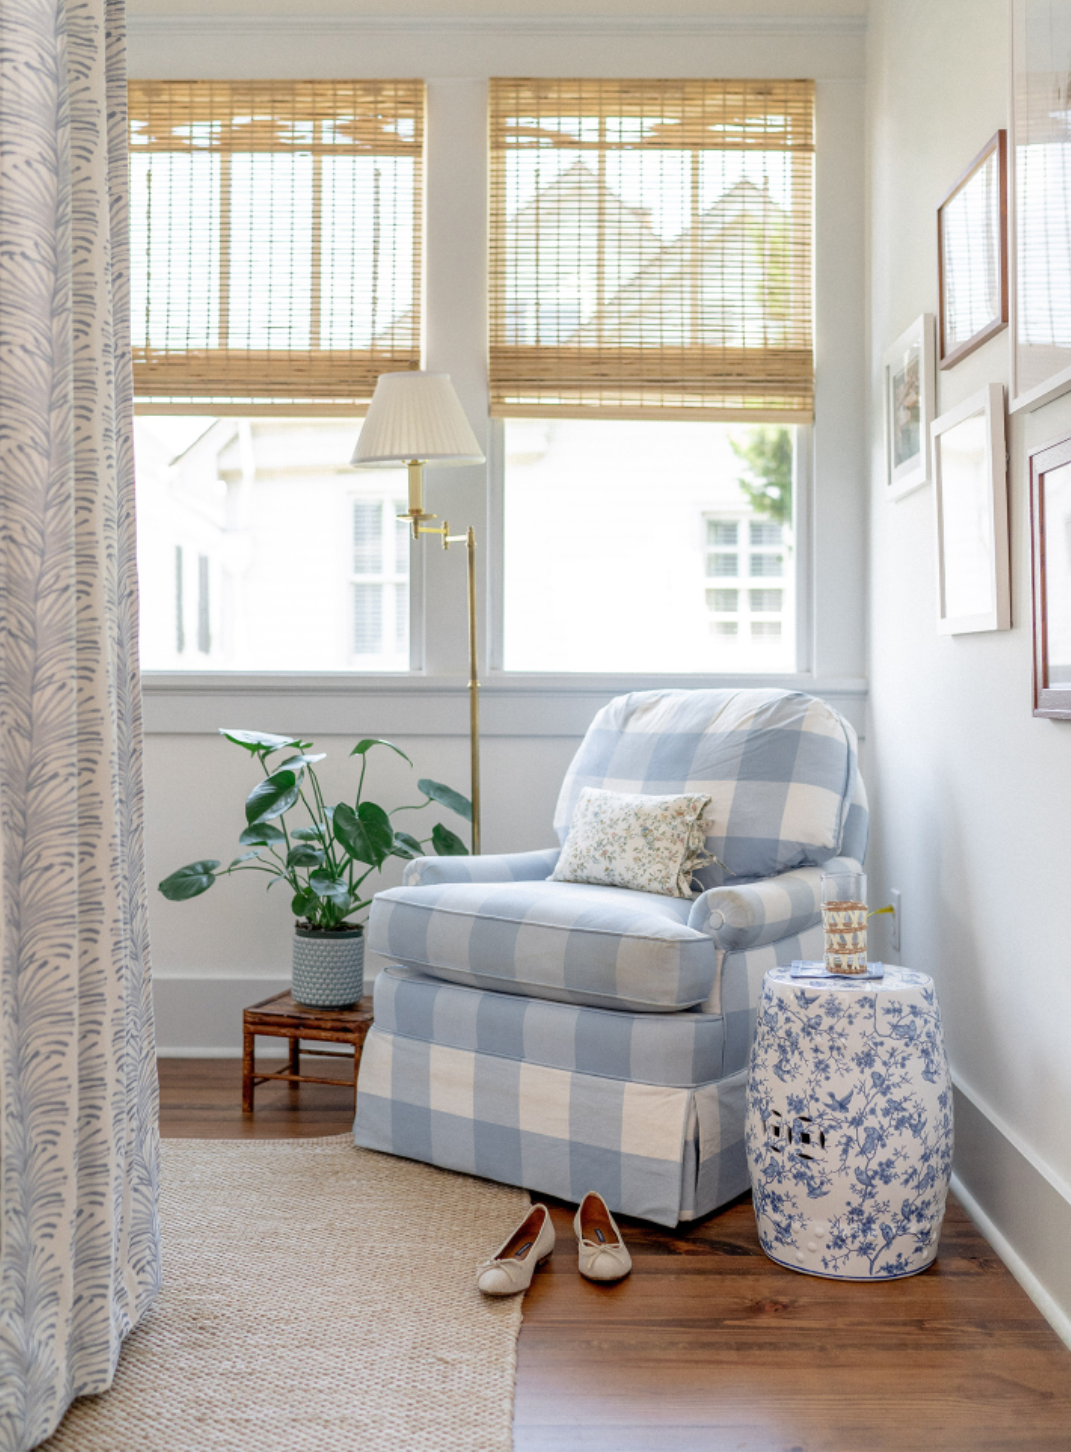 Room corner with a blue plaid sofa chair next to a tall lamp, a plant in a claypot, and two illuminated windows by a Sky Blue Botanical Stripe Custom Curtain